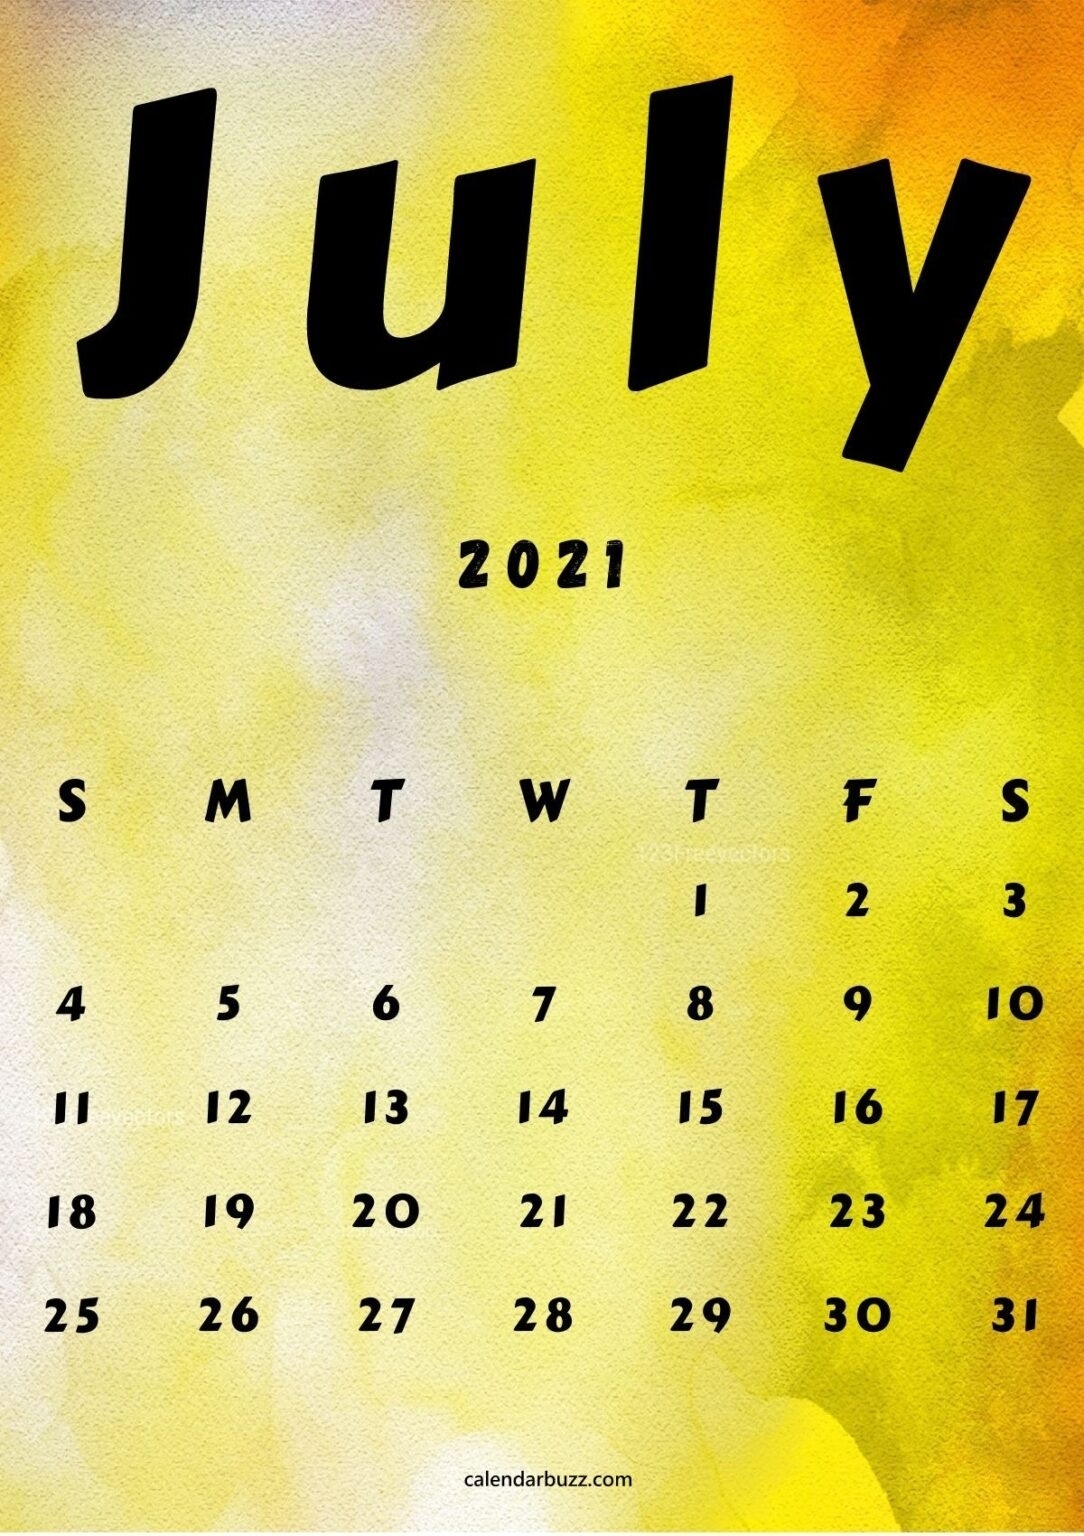 July 2021 Watercolor Calendar Printable Free Download | Calendarbuzz Fourth Of July 2021 Calendar